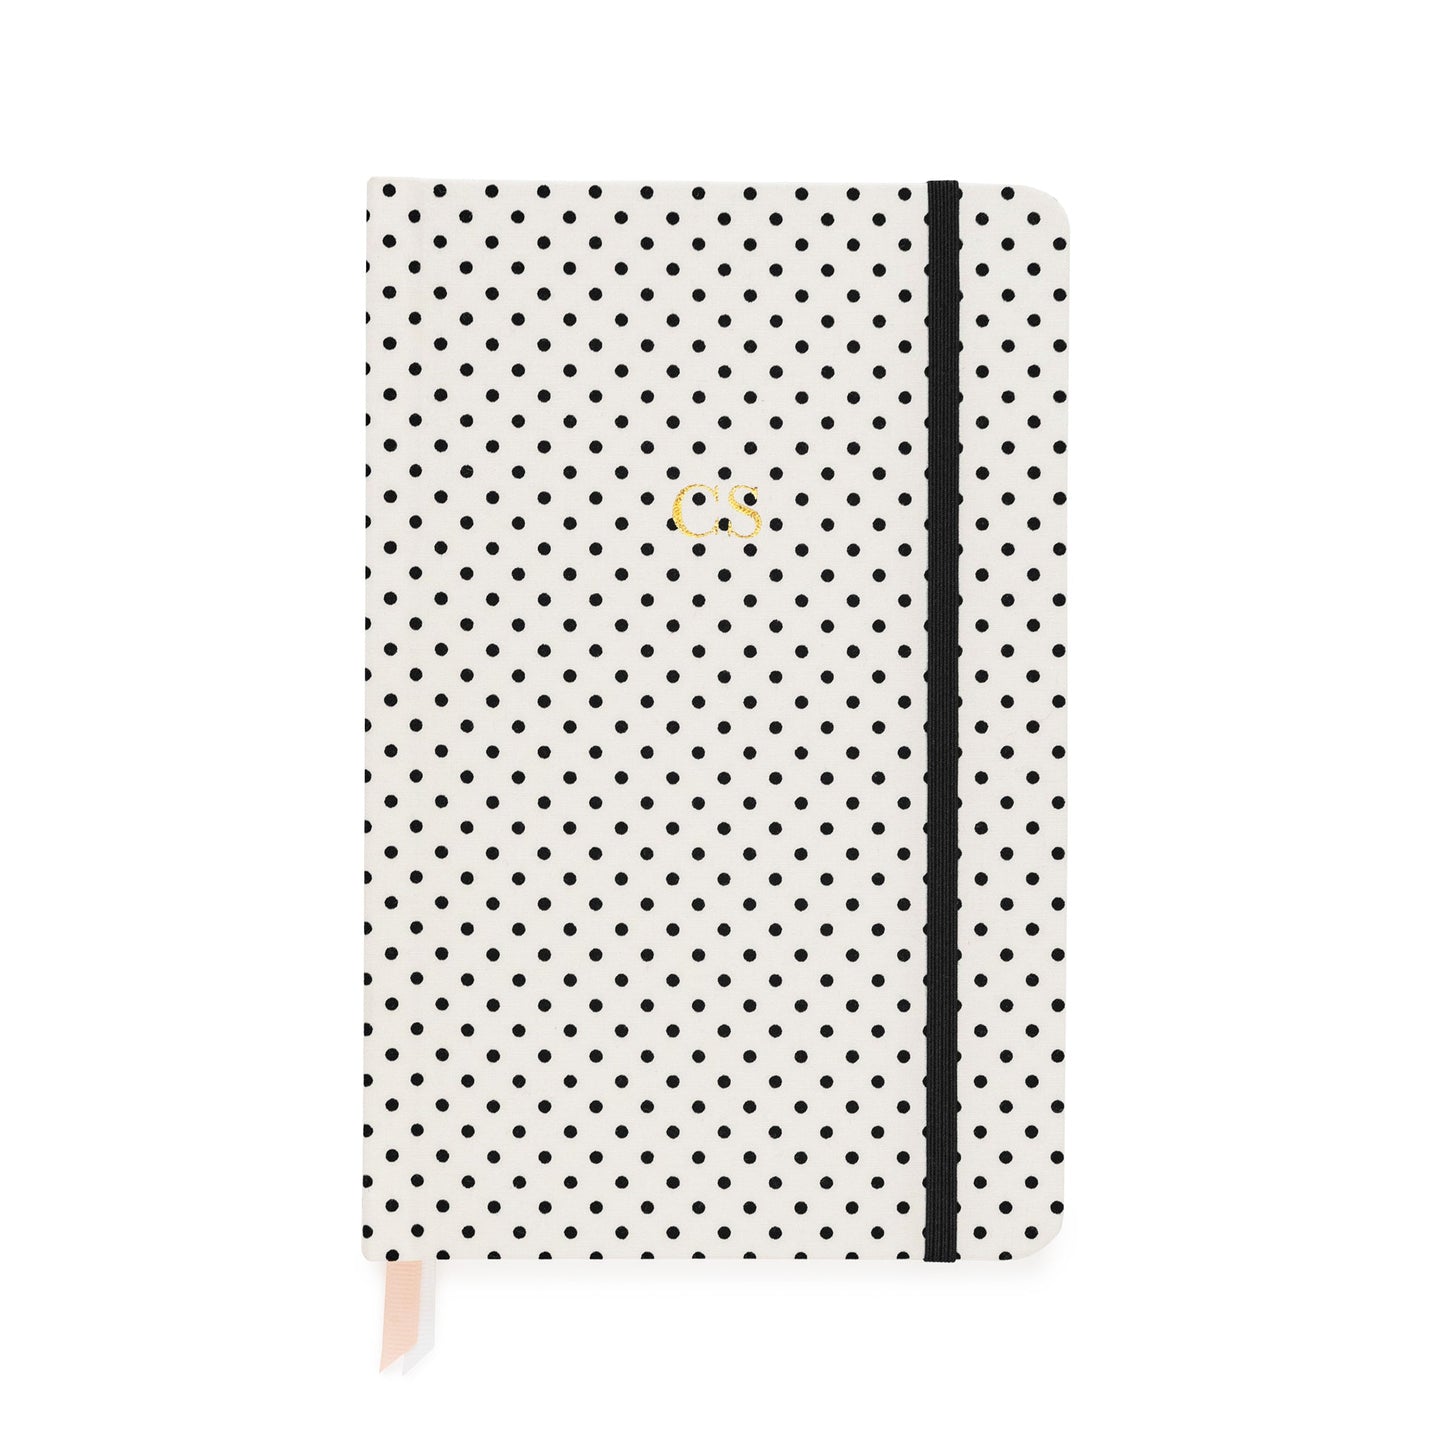 Cream and black dot journal with gold monogram